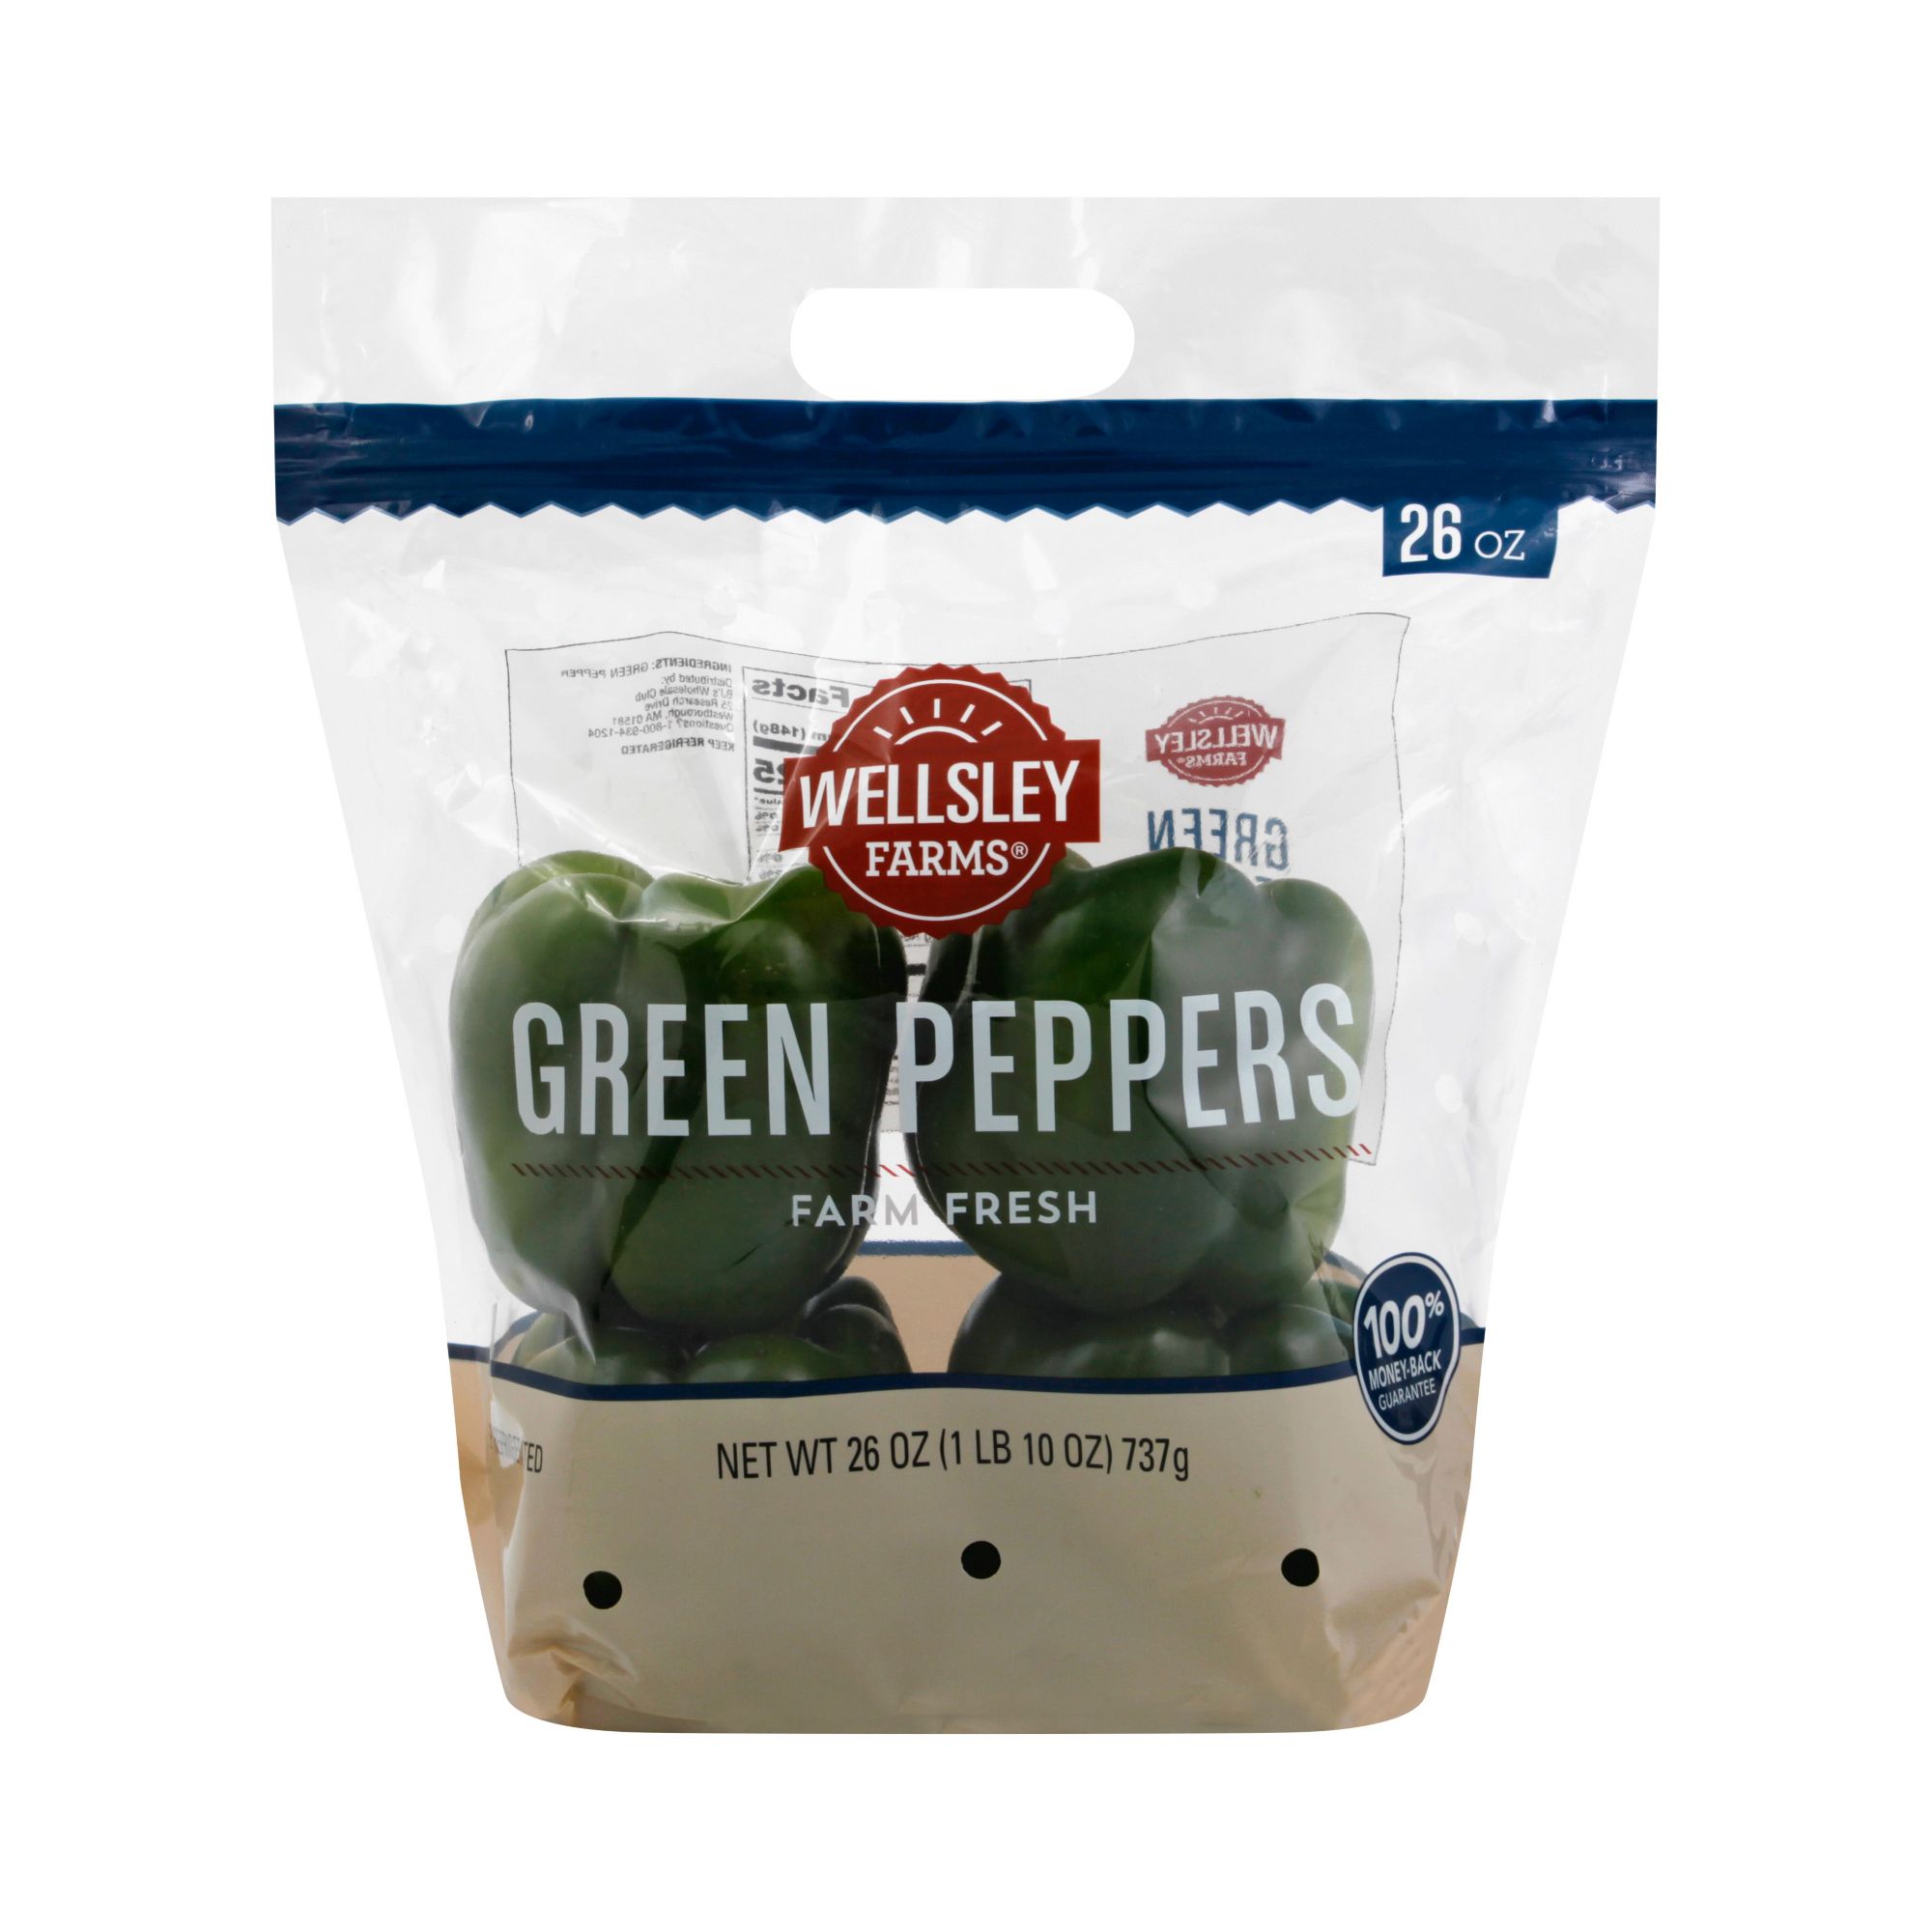 Wellsley Farms Peppers and Onions, 3 ct./1.25 lb. bags